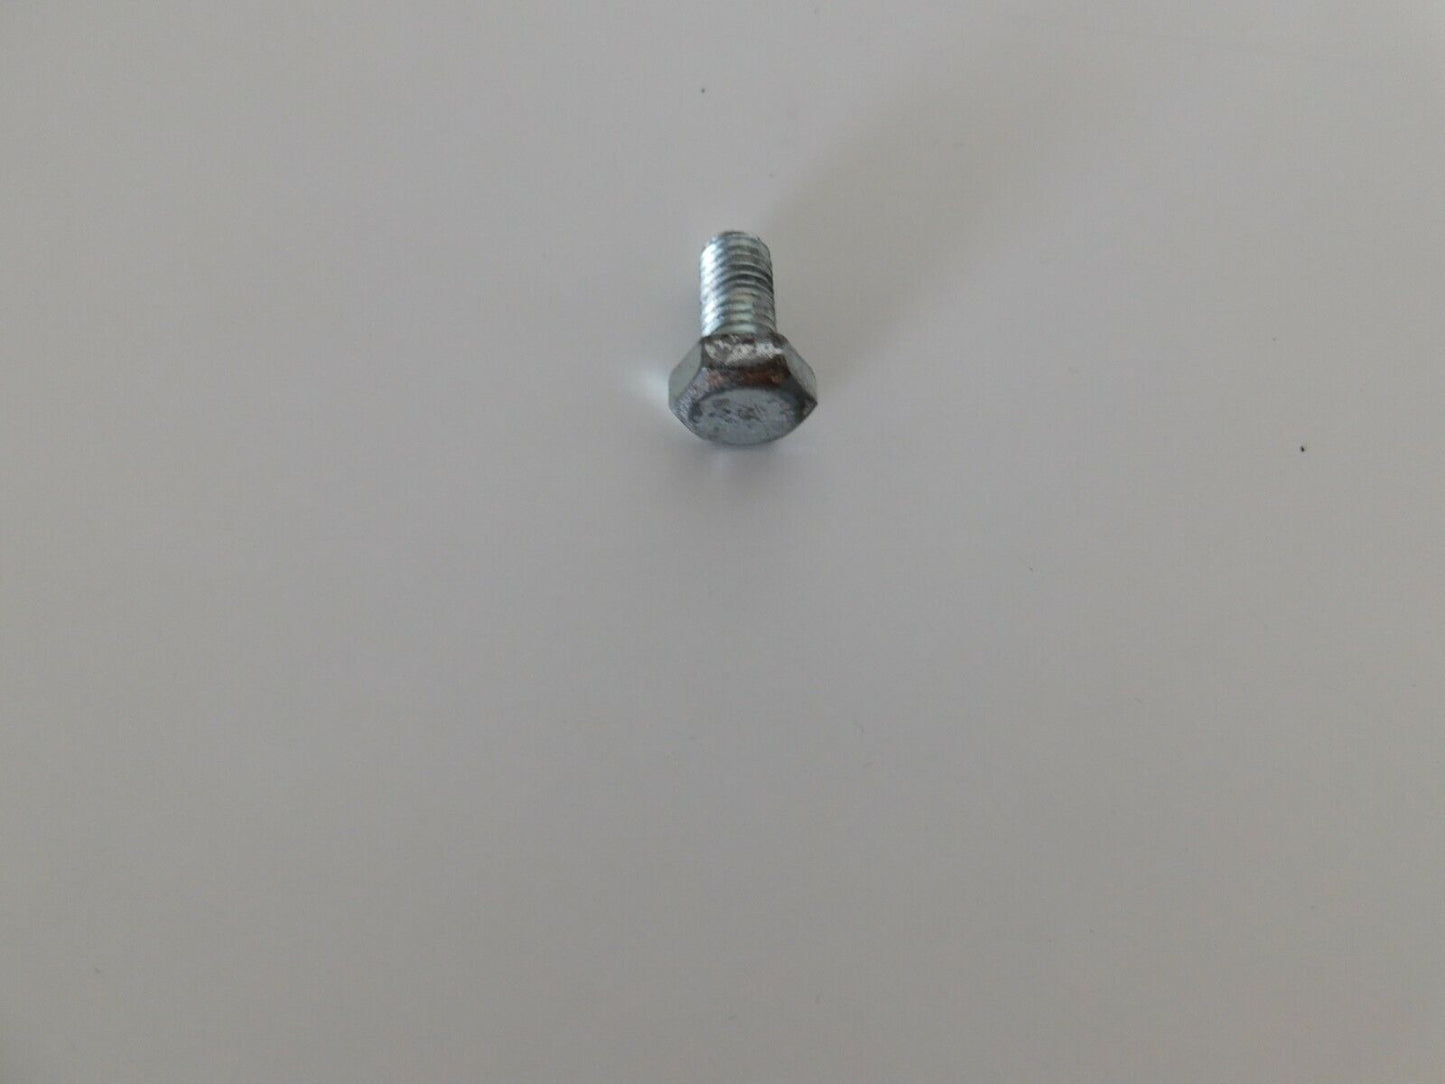 Pivot screw bolt with rust and slightly defective thread